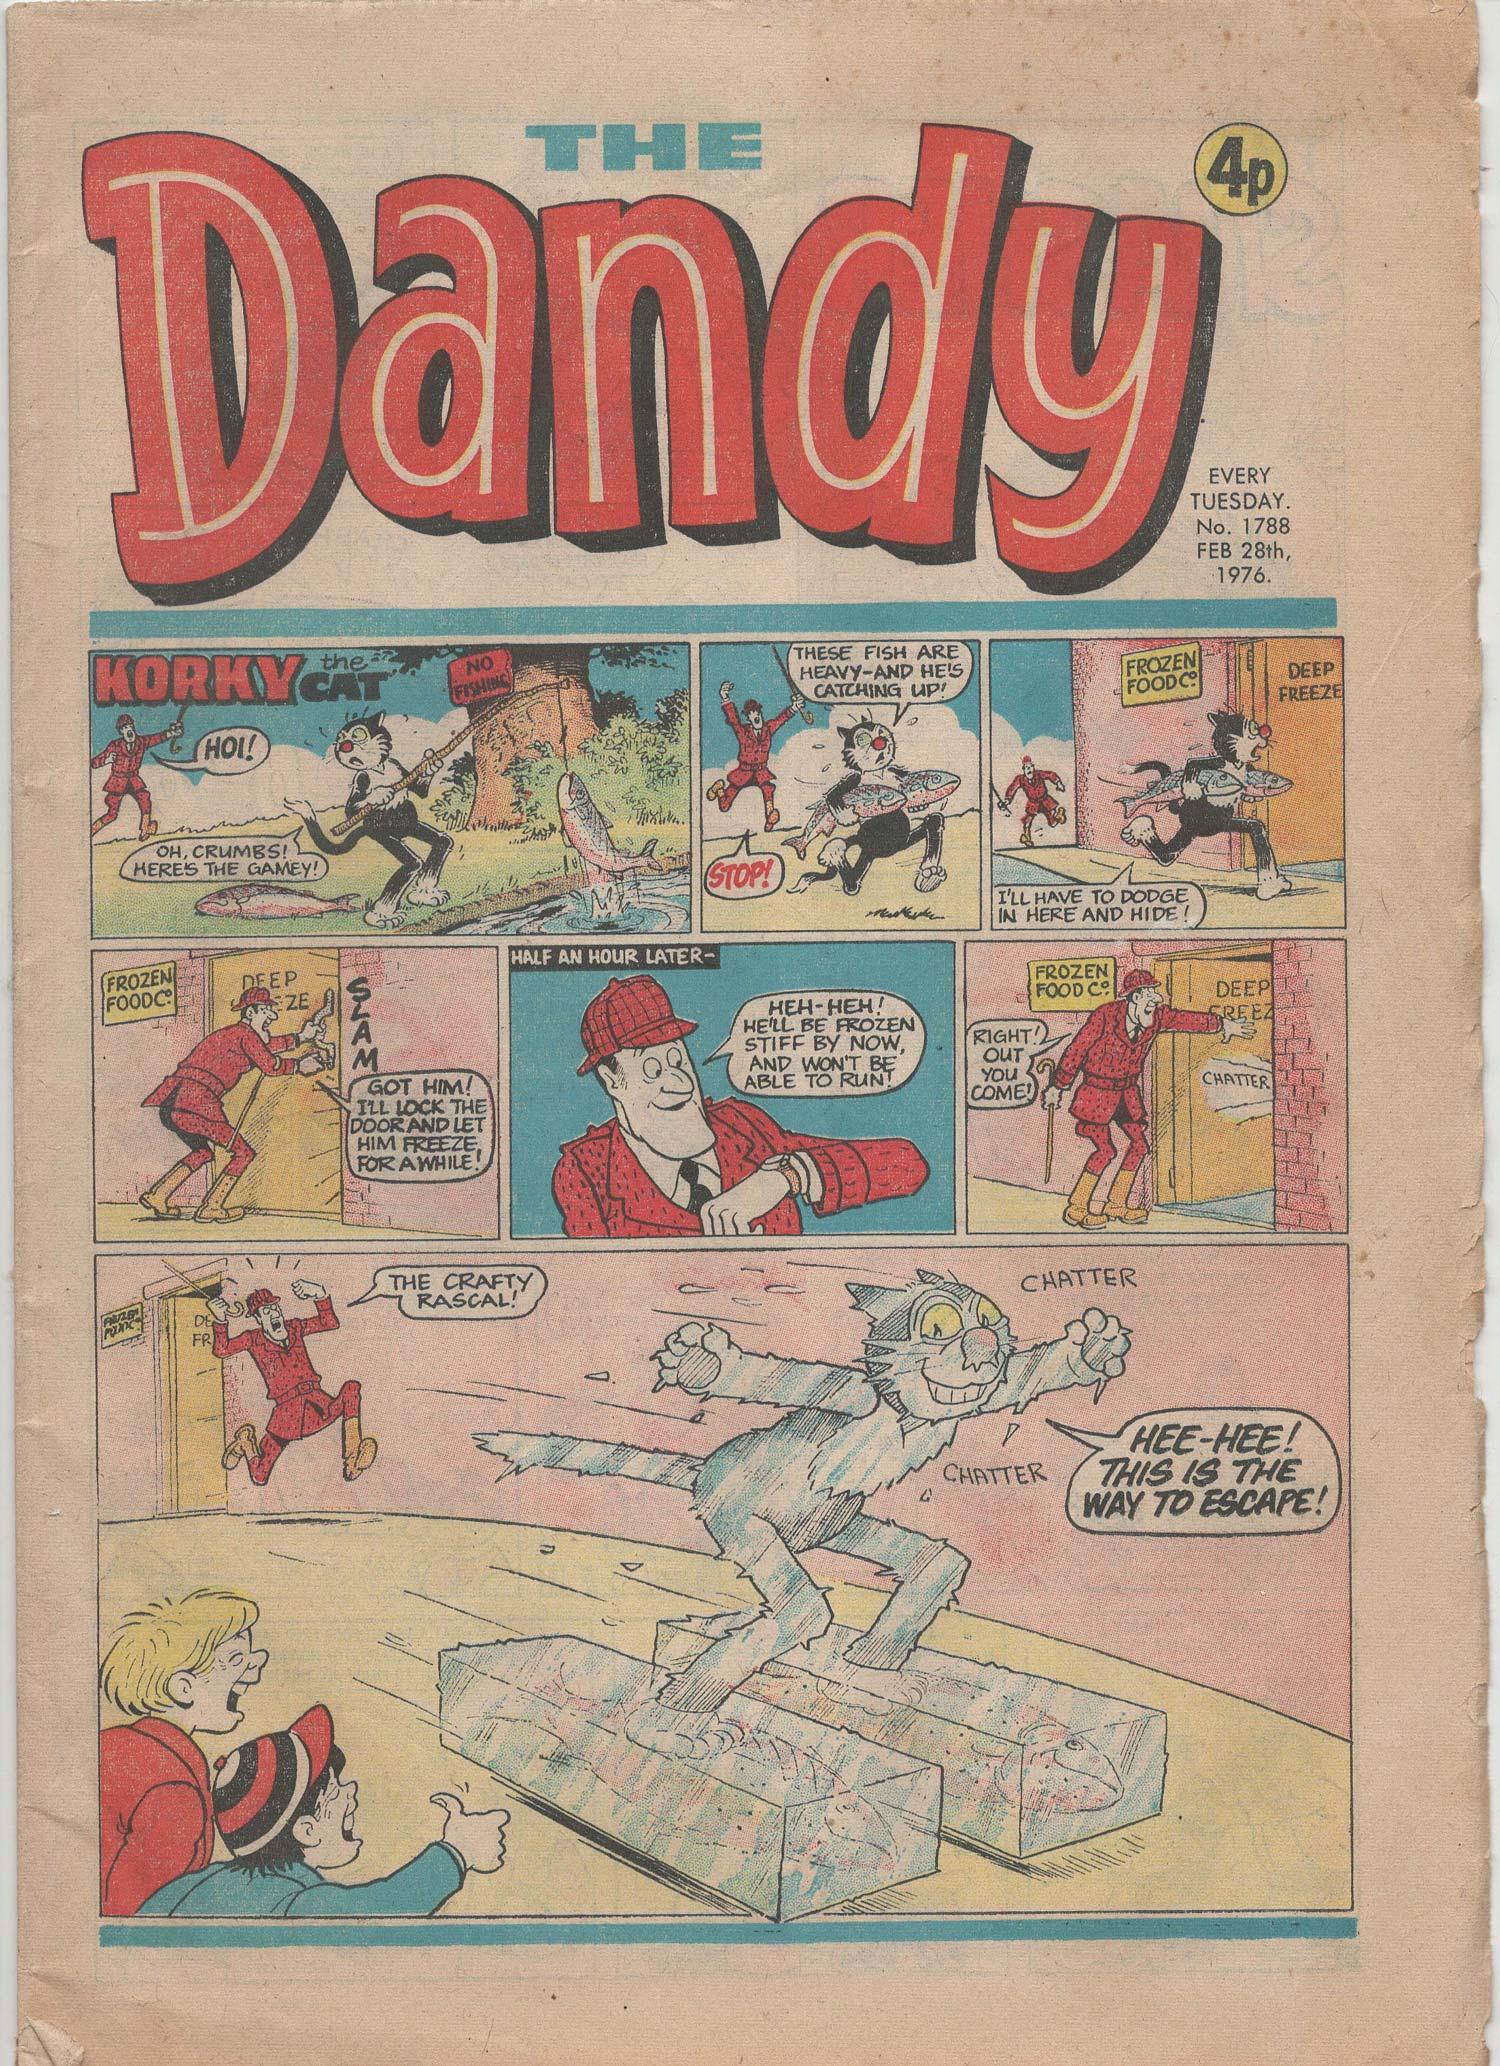 Collectible Comic  Listing: Dandy Issue Number 1788 (28th February 1976)